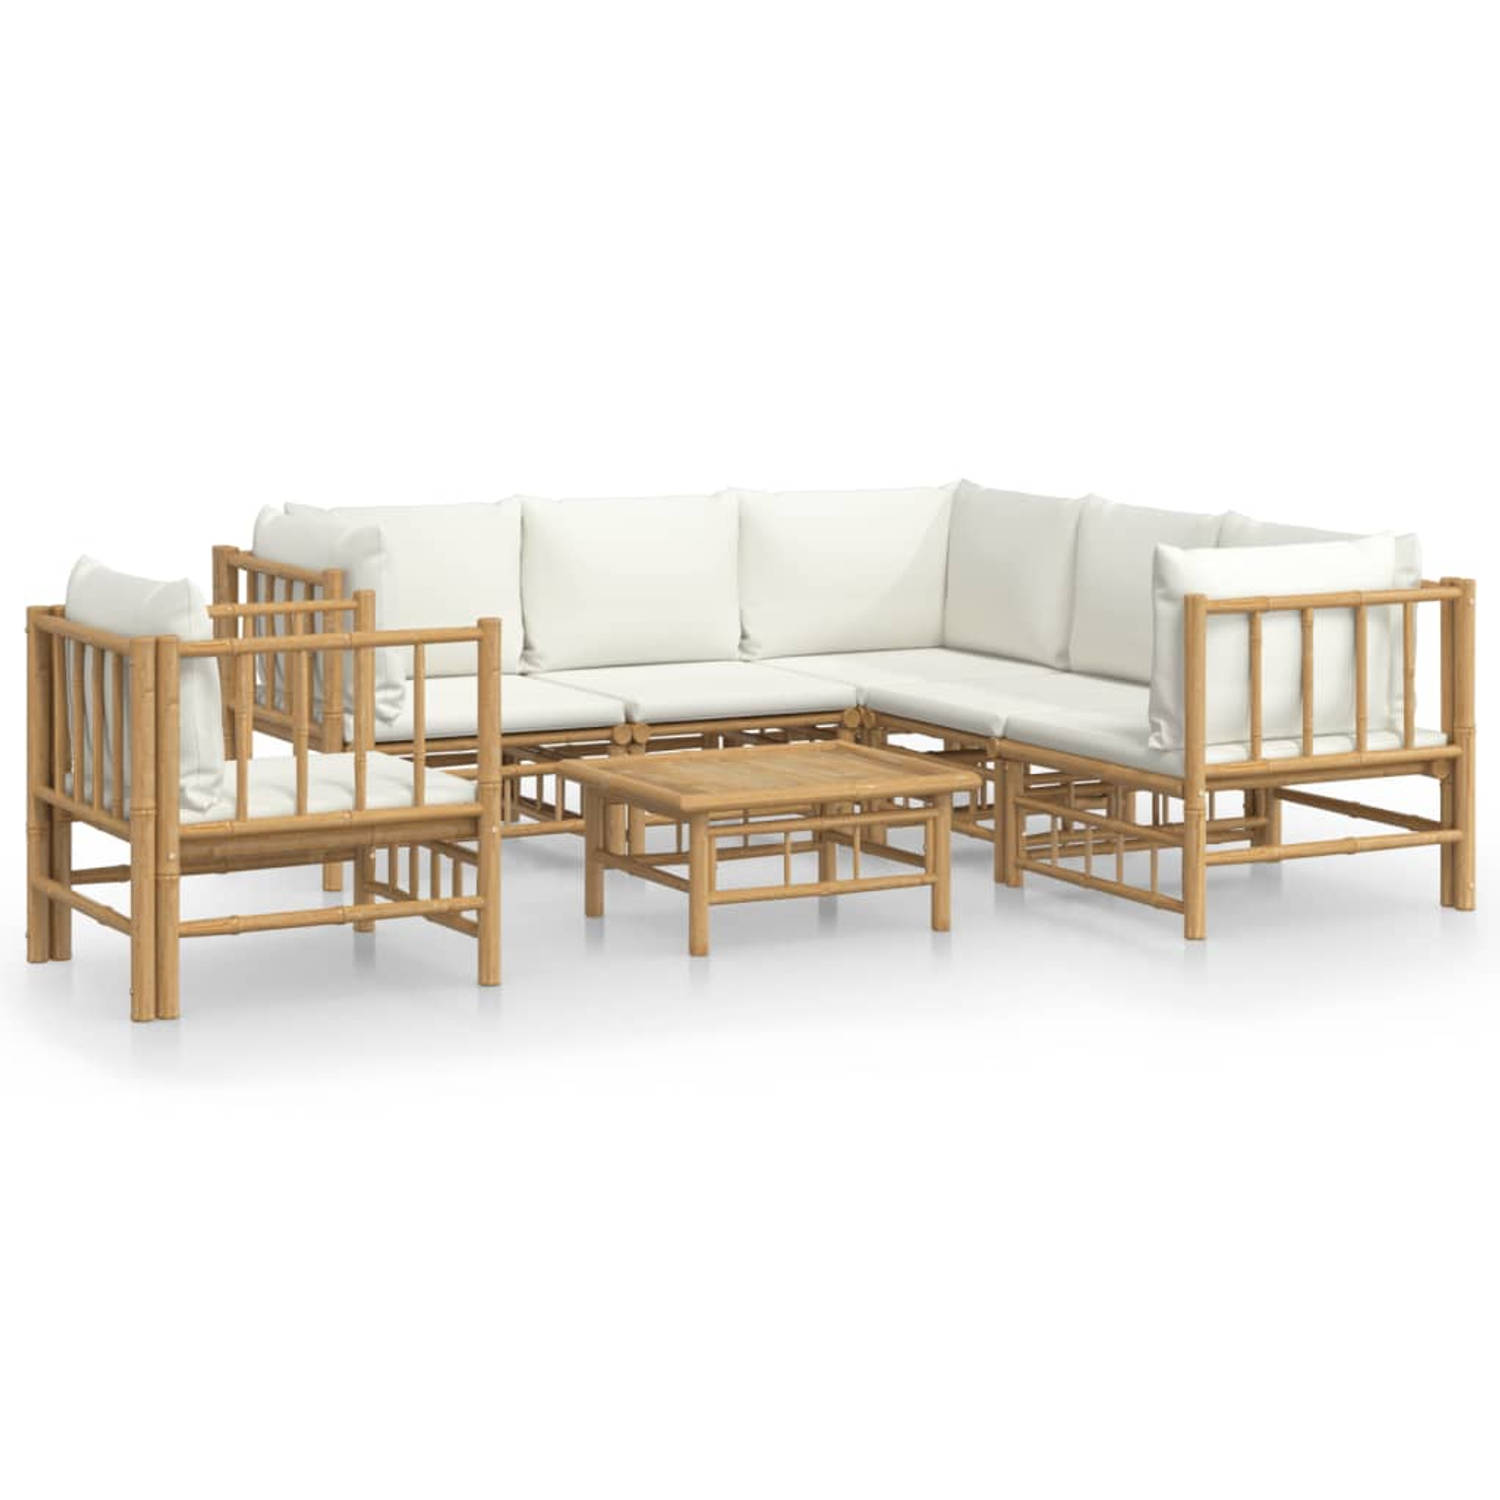 The Living Store 7-delige Loungeset met kussens bamboe crèmewit - Tuinset